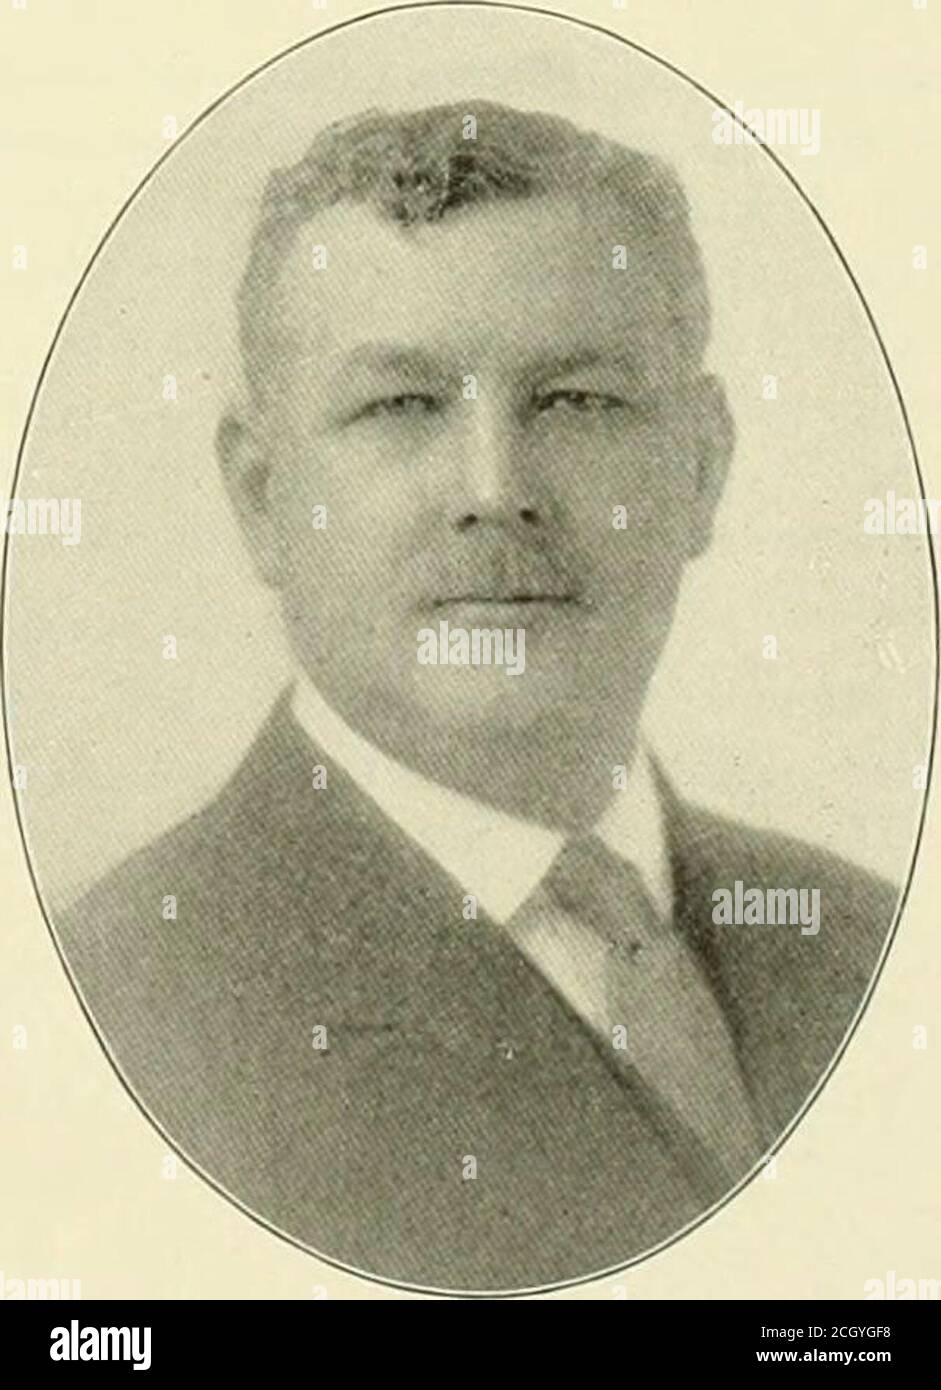 . Railway age gazette . o 1891mechanical draftsman,chief clerk to the super-intendent of machineryand chief clerk to thegeneral superintendent.In November, 1891, hewas appointed assistantto the general managerof the Denver & RioGrande. On November1, 1894, he became assistant general managerof that road and retainedthat position until July1, 1900, when he was ap-pointed also general manager of the Colorado Midland. OnJune 1, 1904, he became a vice-president of the Denver & RioGrande. On November 5, 1909, he also became the first vice-president of the new Western Pacific, the western extension o Stock Photo